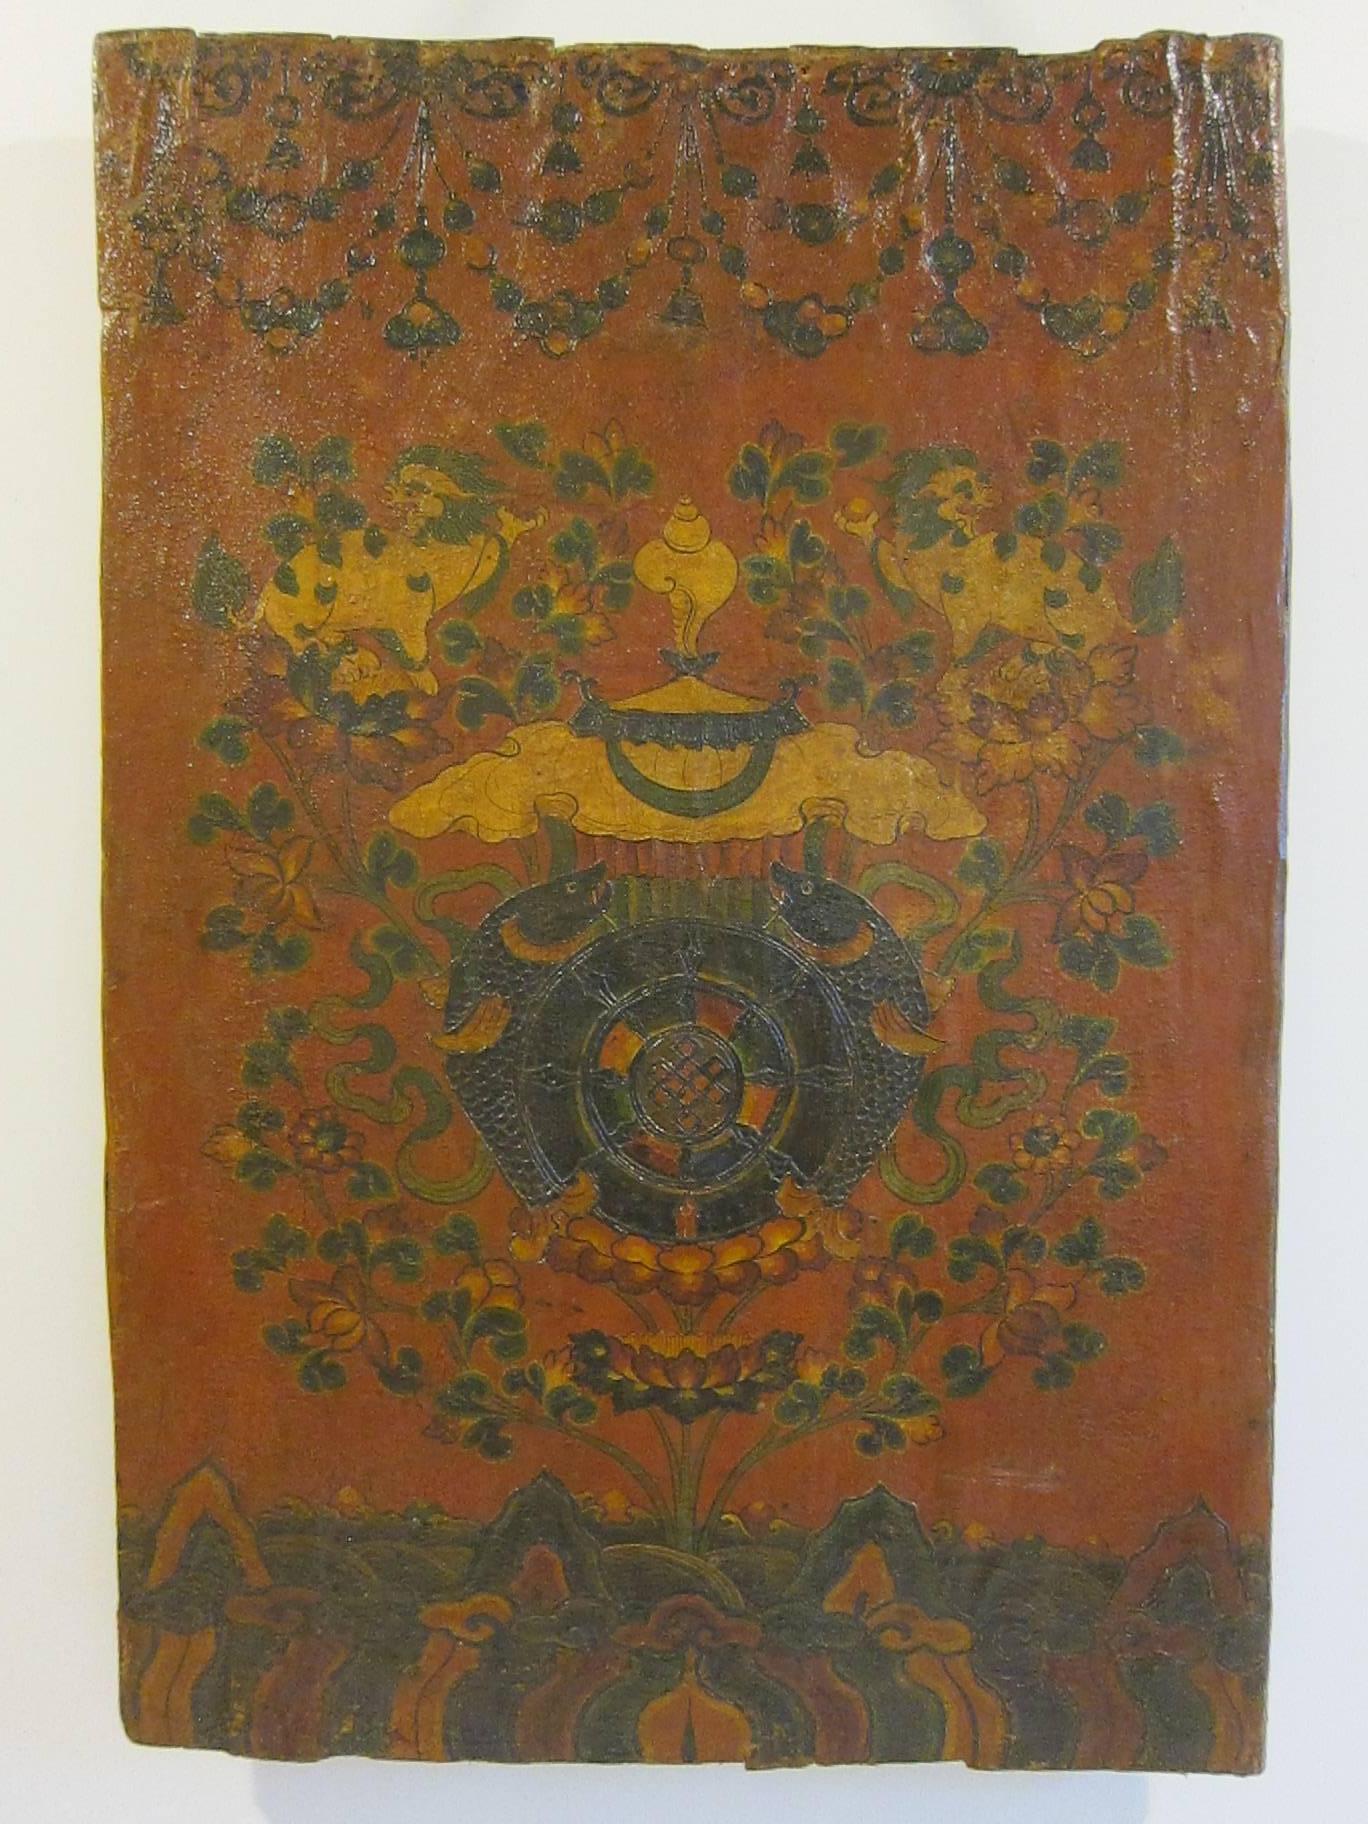 Tibetan painted door, circa 1900. A canvas is applied to the door face and decorated using pigments (mineral colors) and lacquer. This door has strong patina showing age with raised lacquer work. An excellent example of Tibetan art and culture. 

